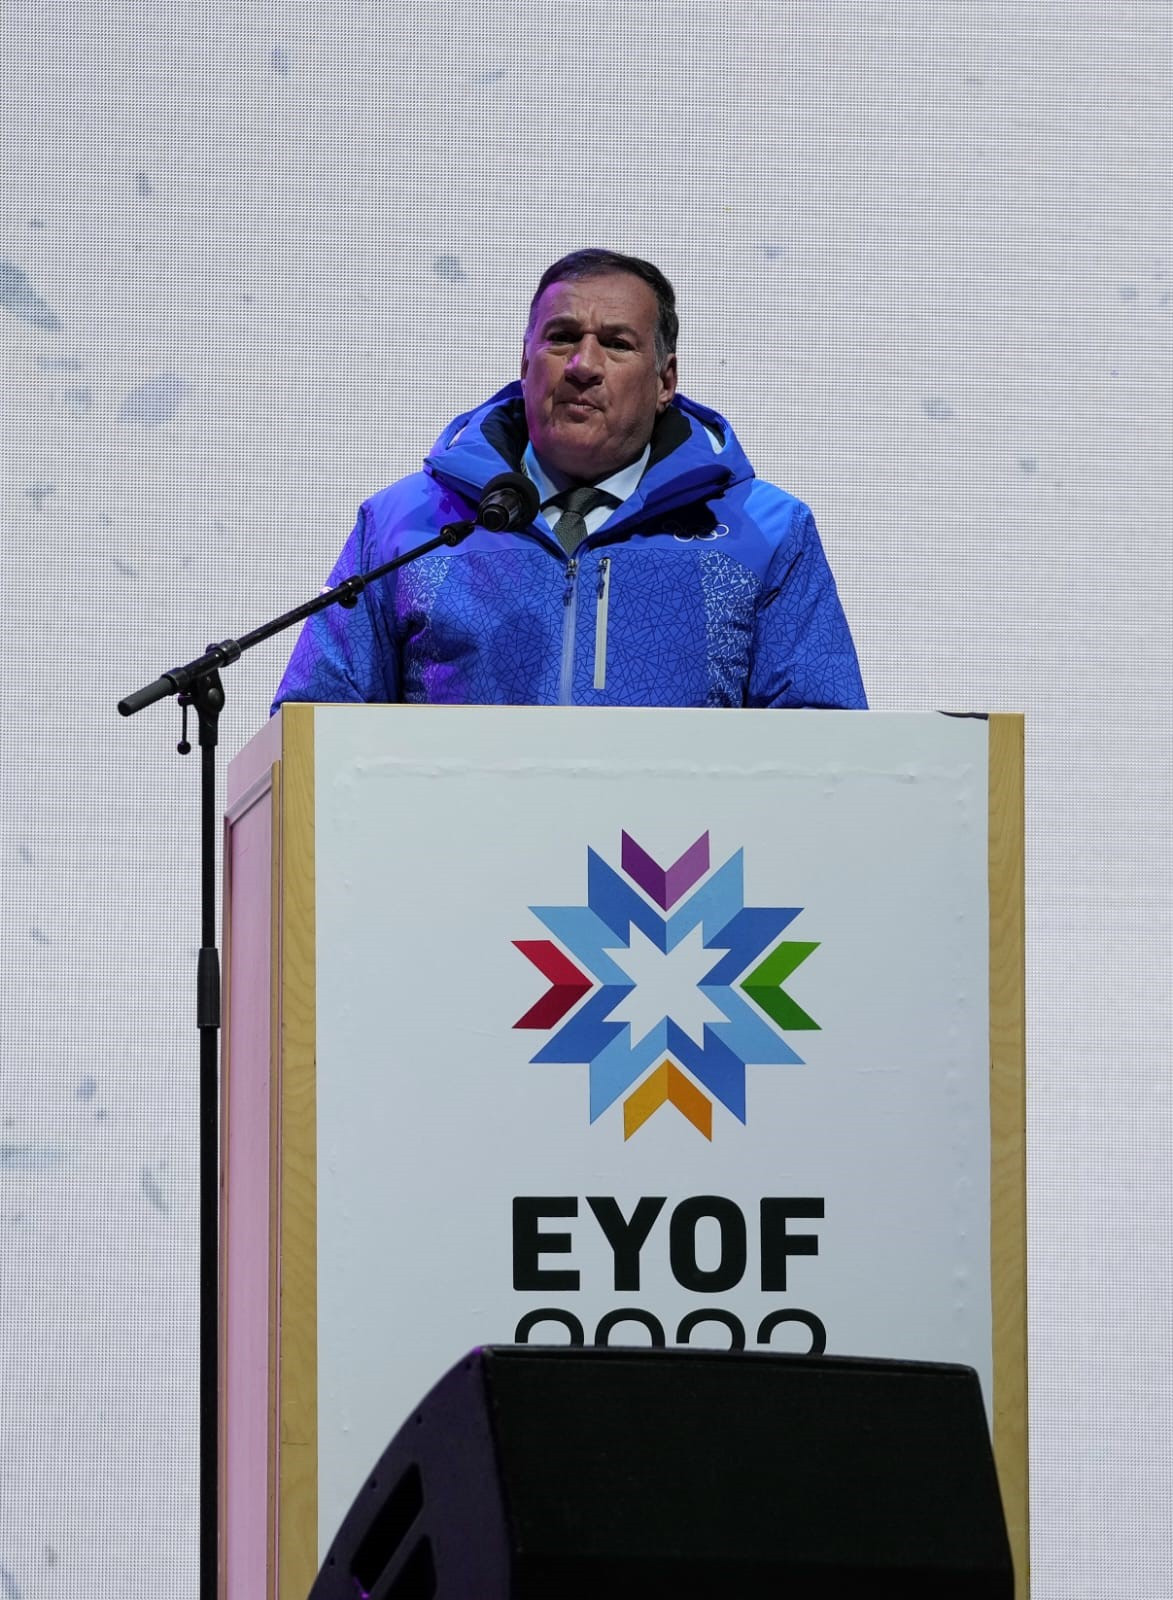 Spyros Capralos declared the athletes competing at the Winter EYOF 